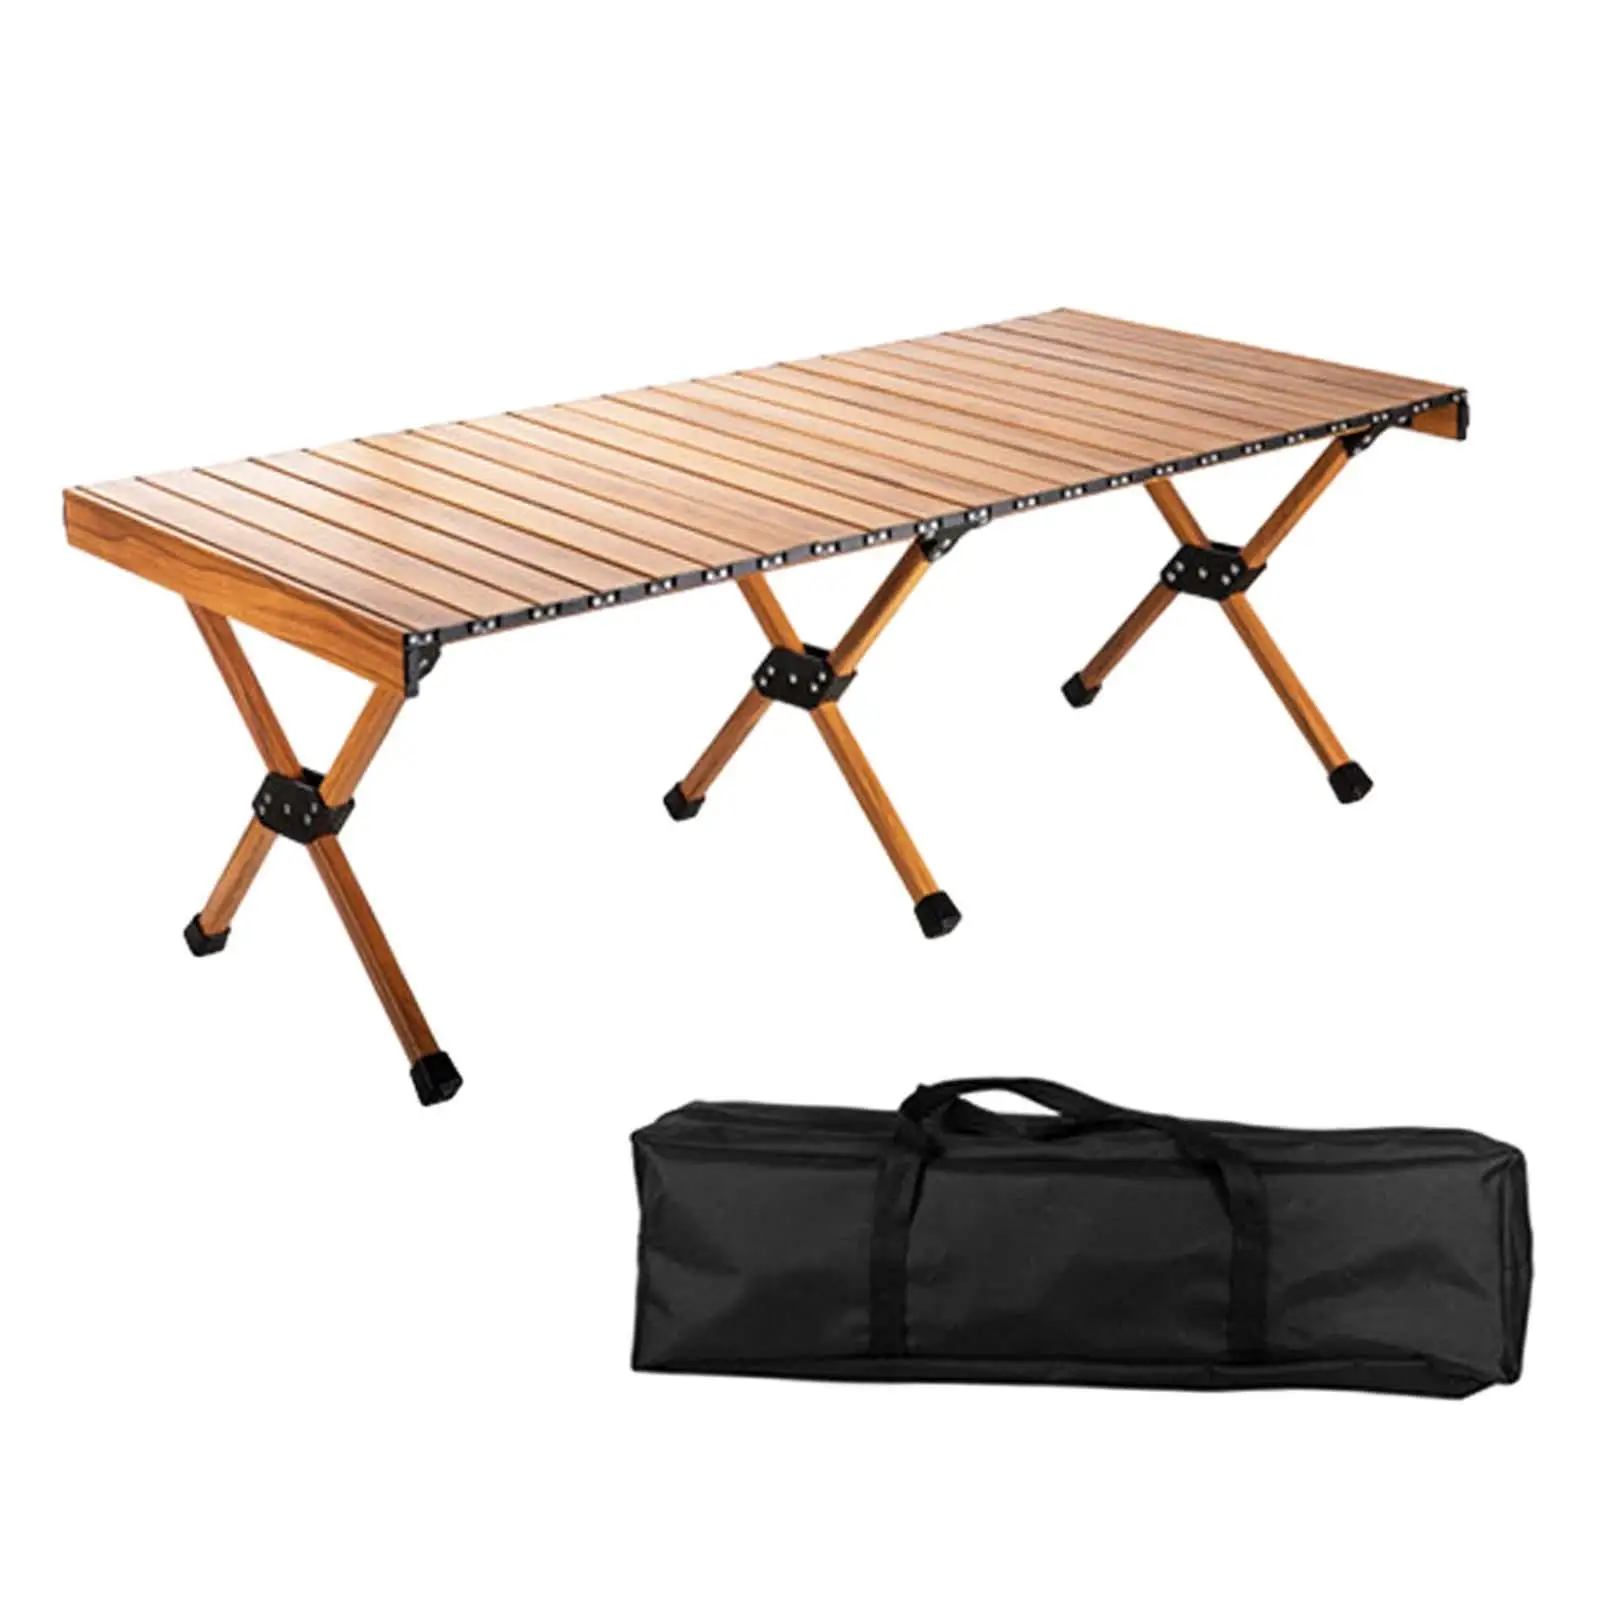 Camping Folding Table Portable Easy to Carry Lightweight Foldable Picnic Table for Balcony Outdoor Indoor Hiking Kitchen Deck